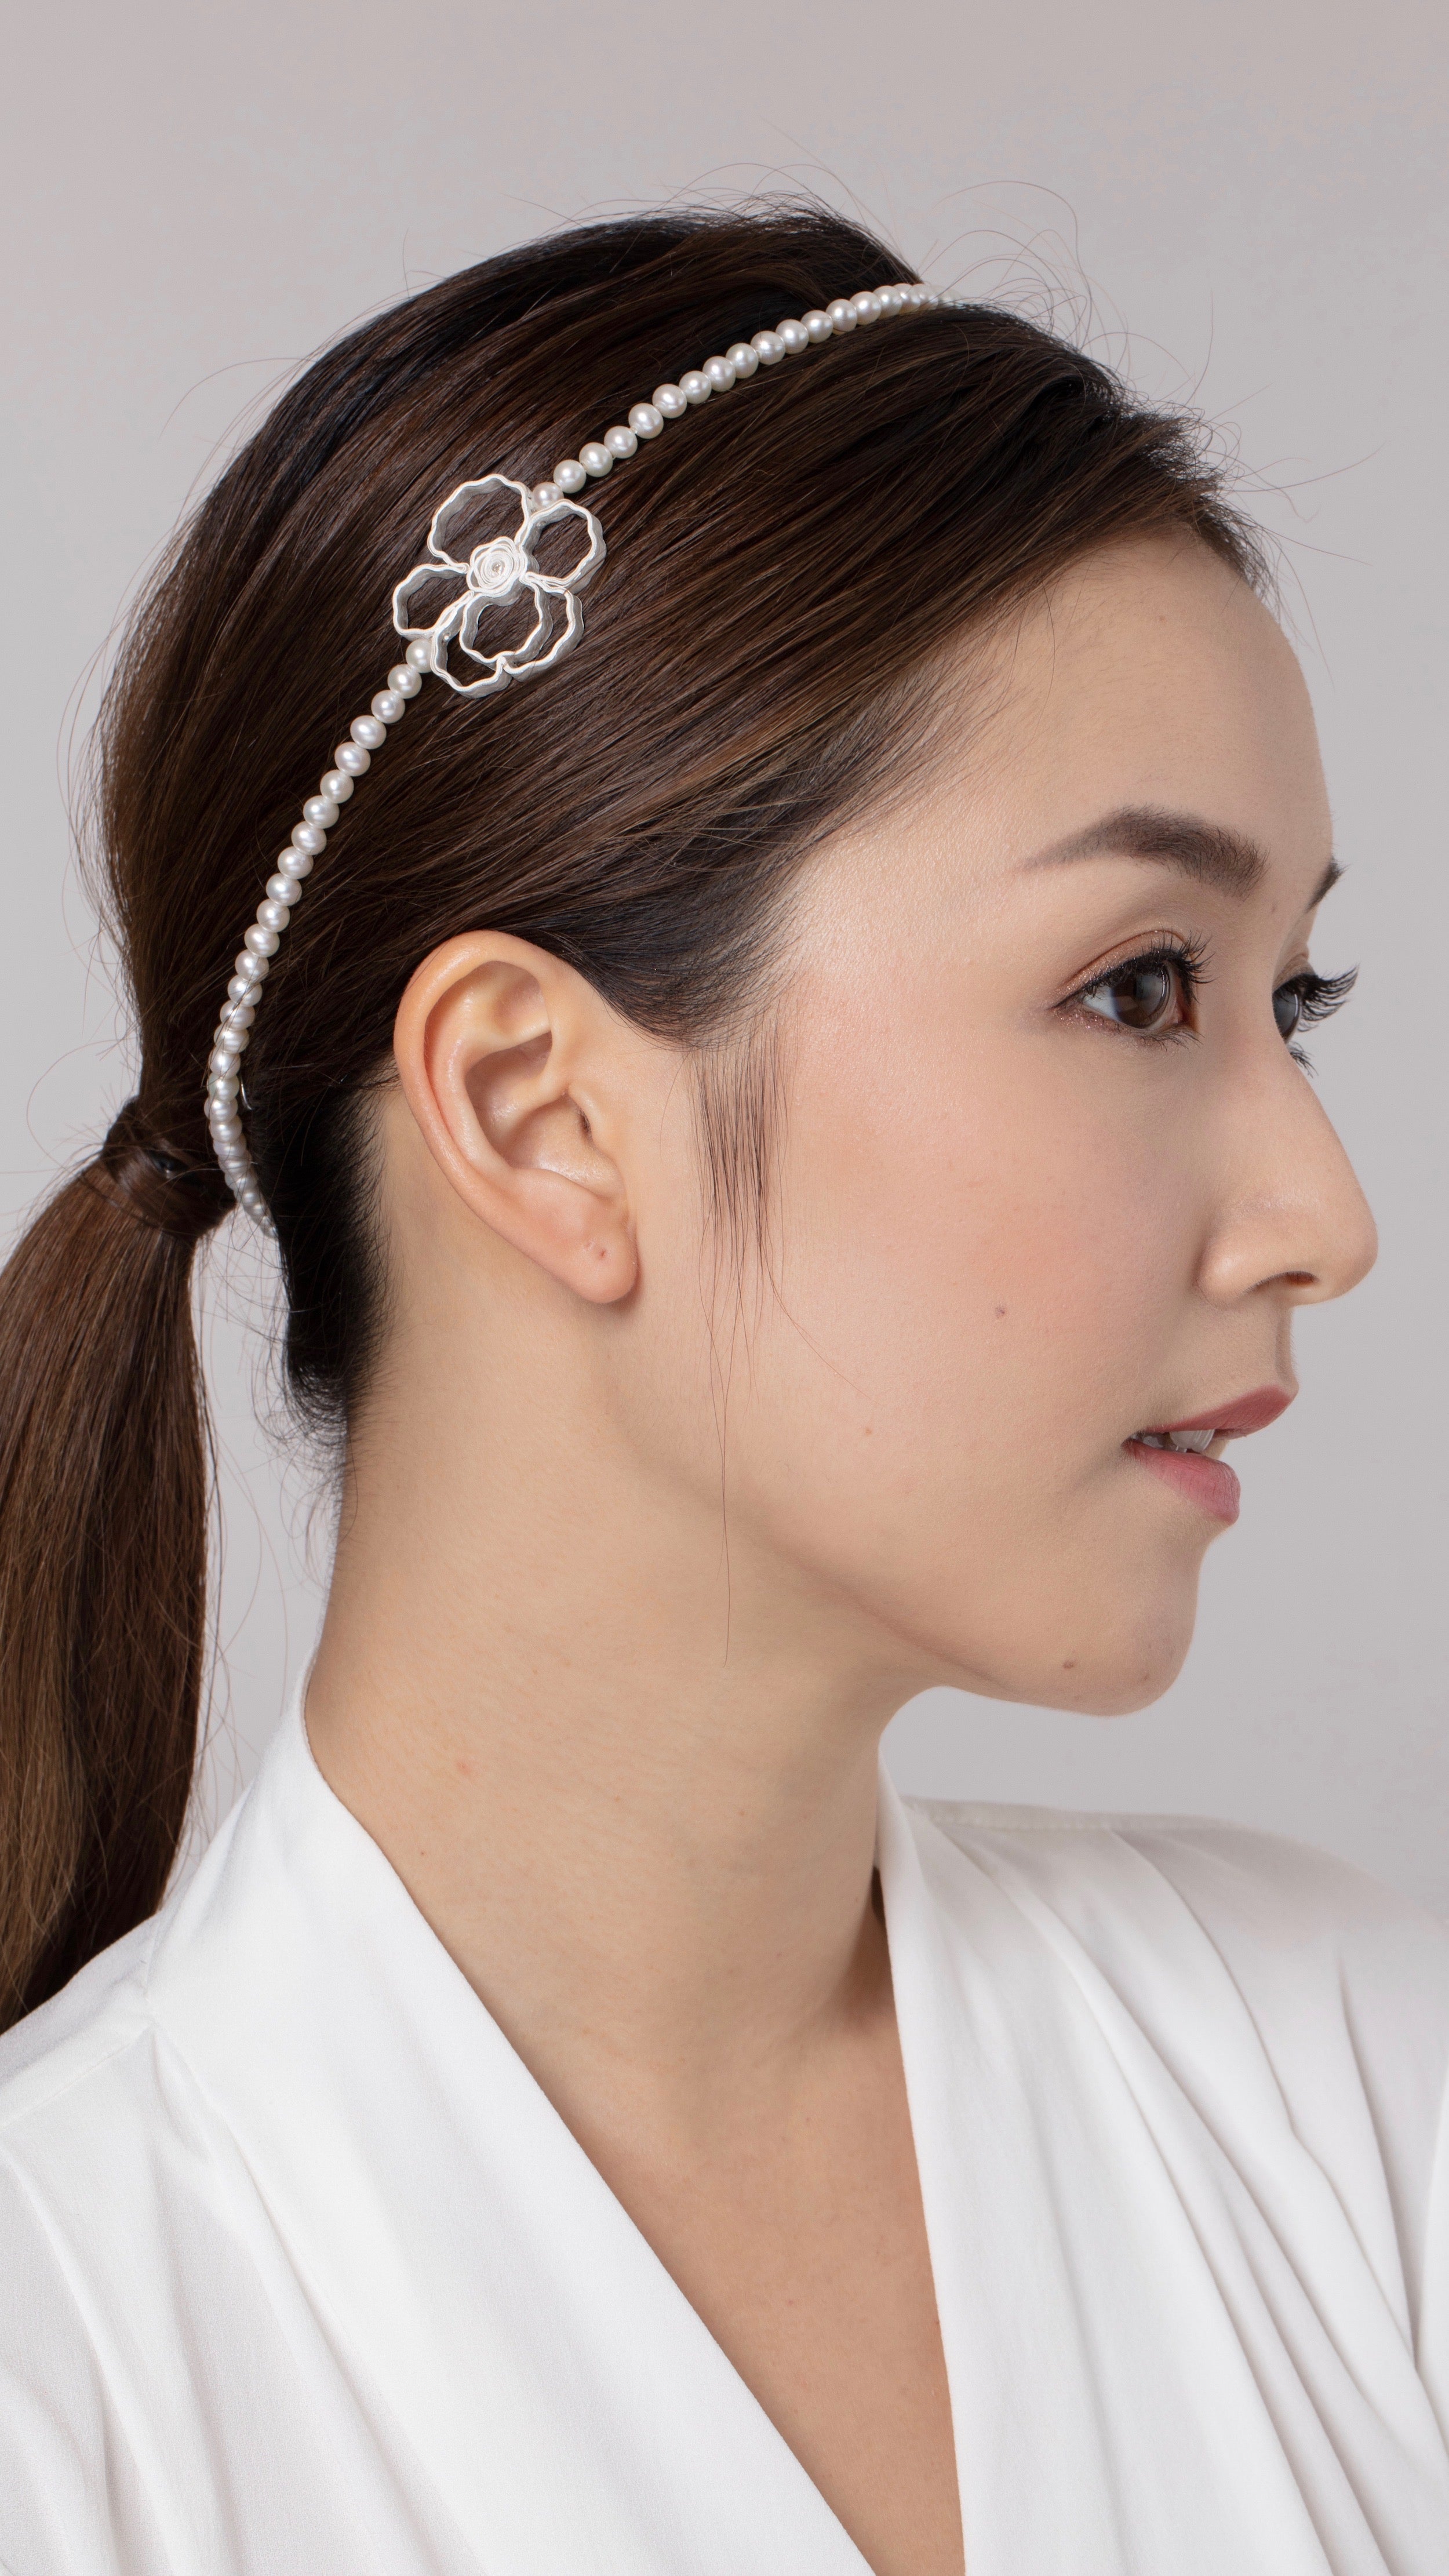 Passion Blume Necklace / Hairband